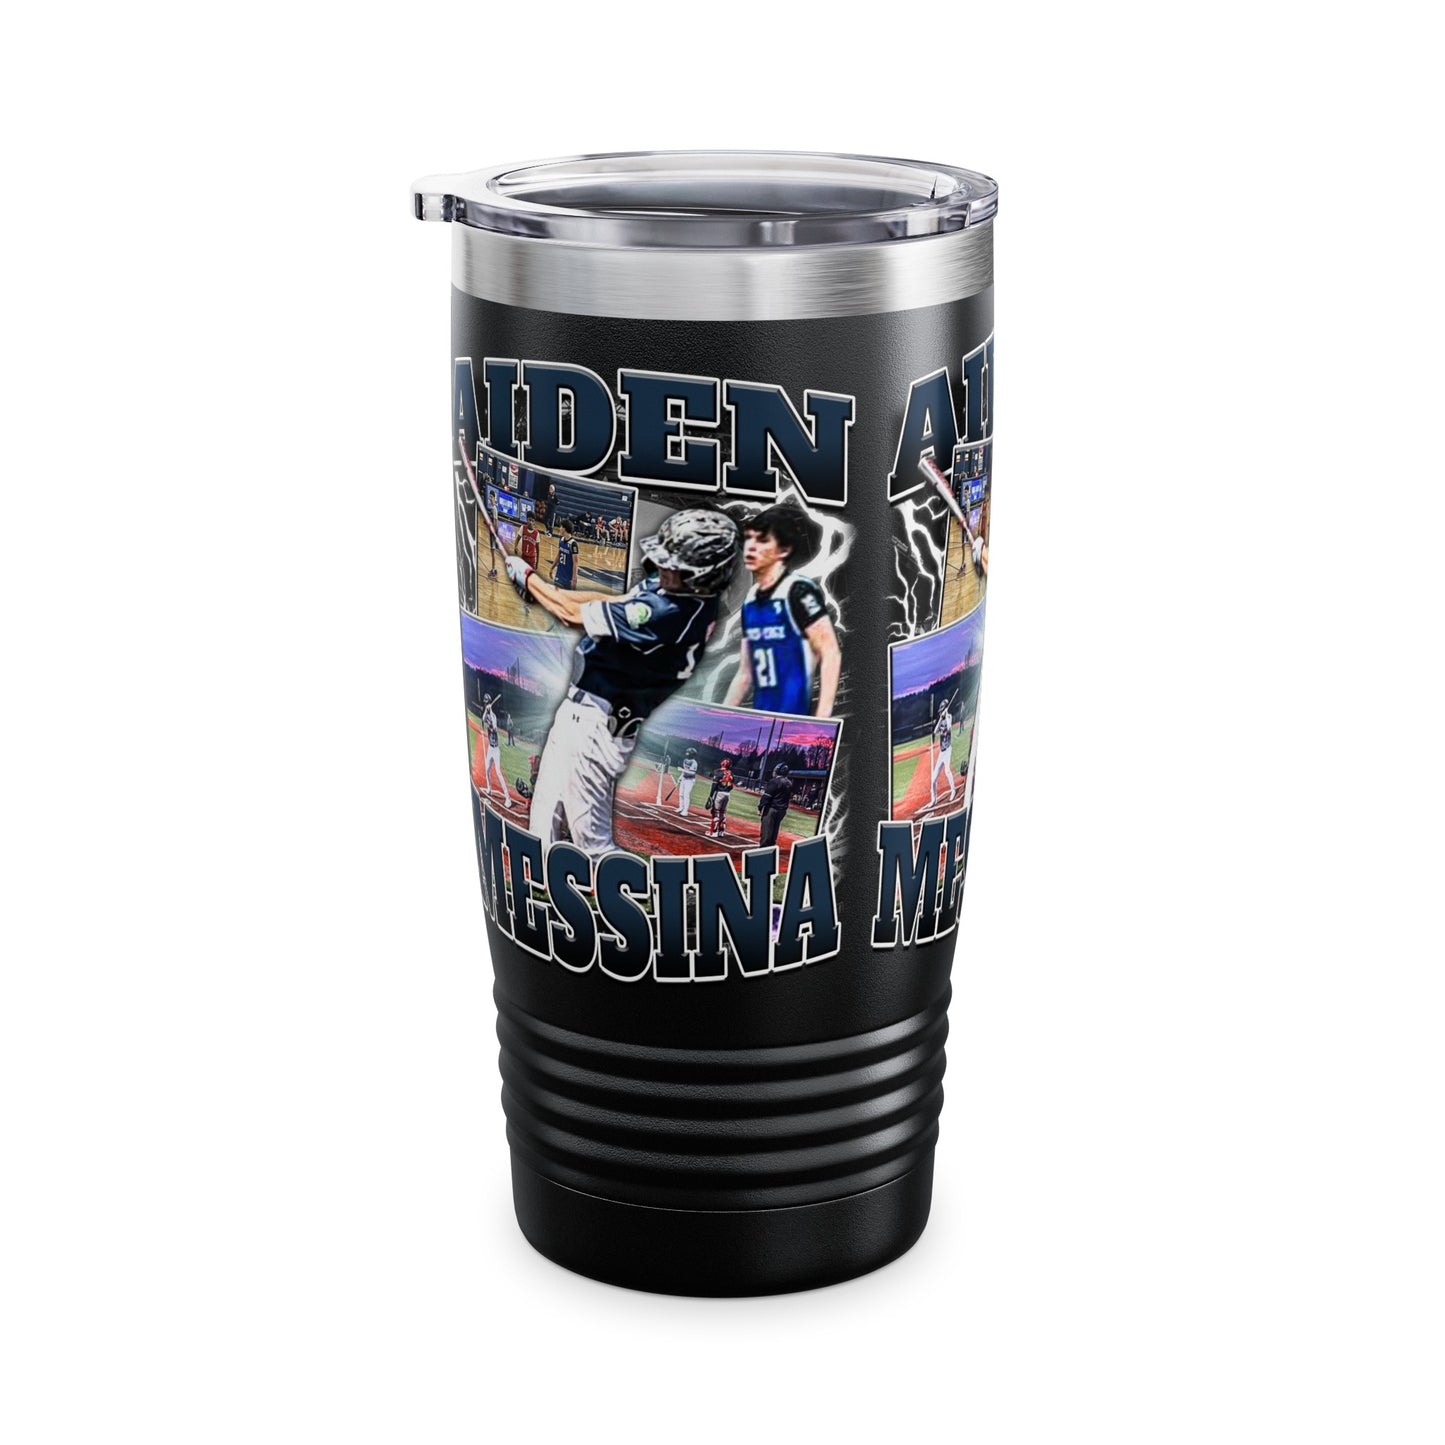 Aiden Messina Stainless Steal Tumbler